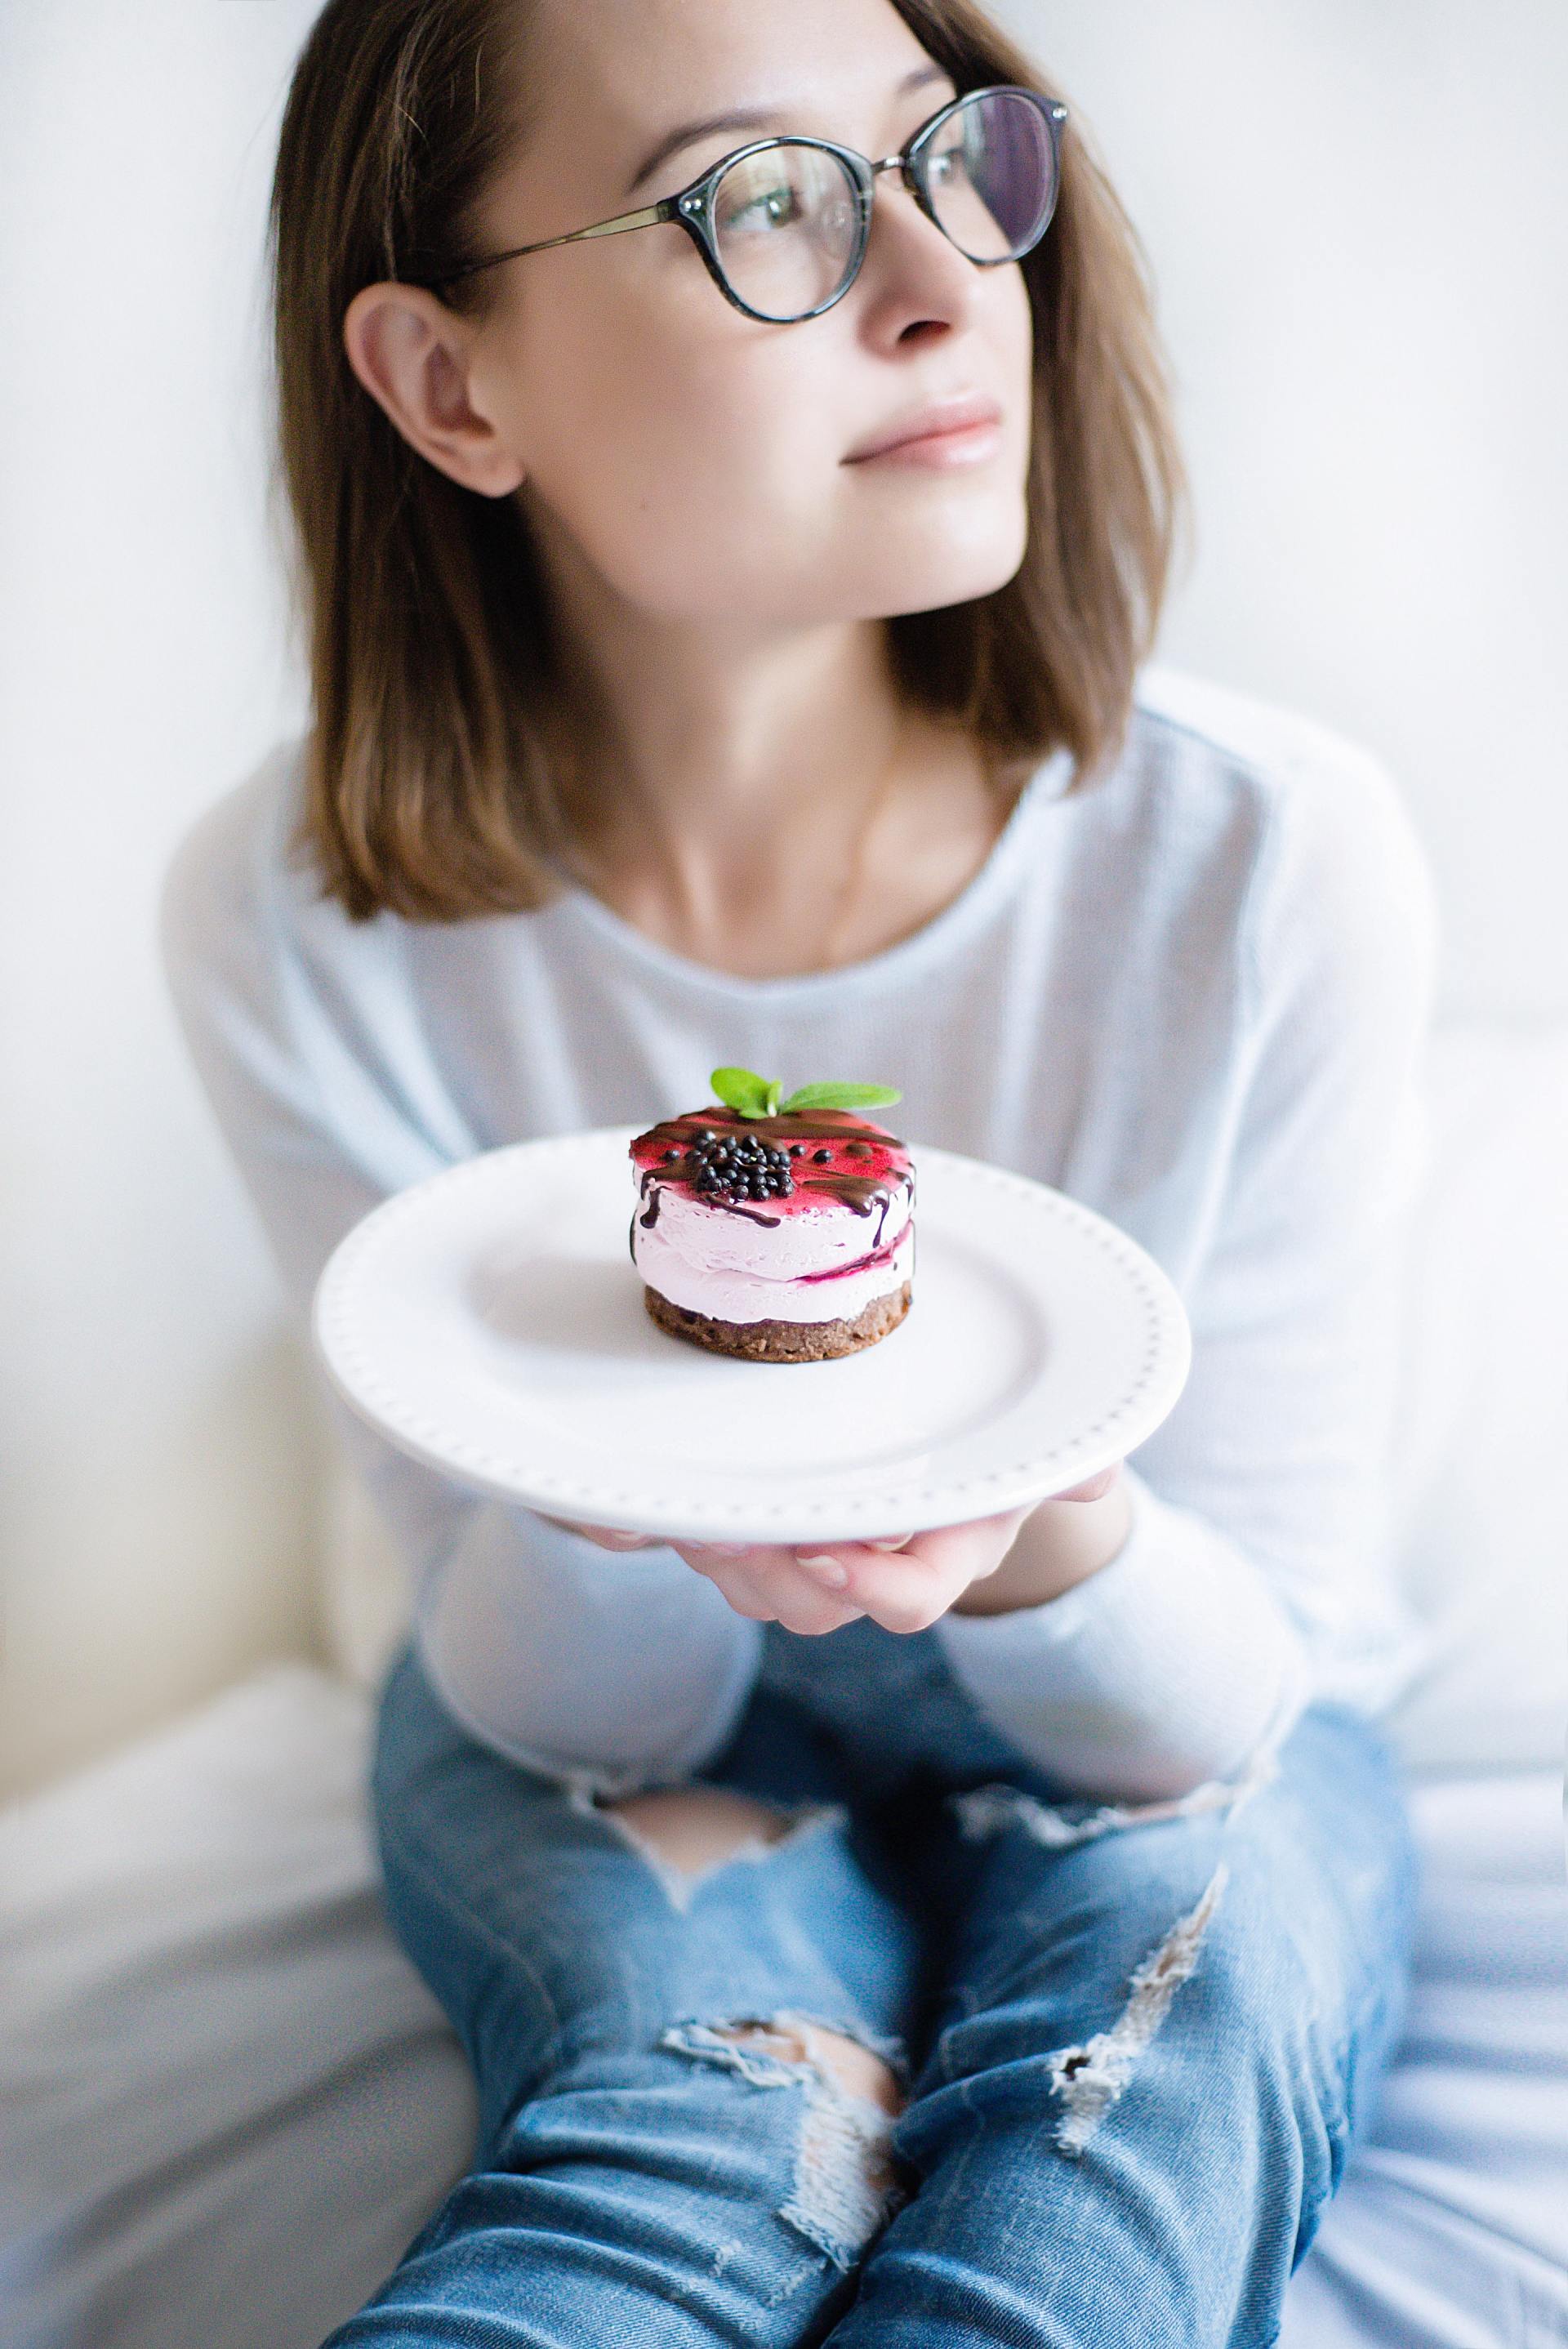 A girl considering to eat a cheesecake.